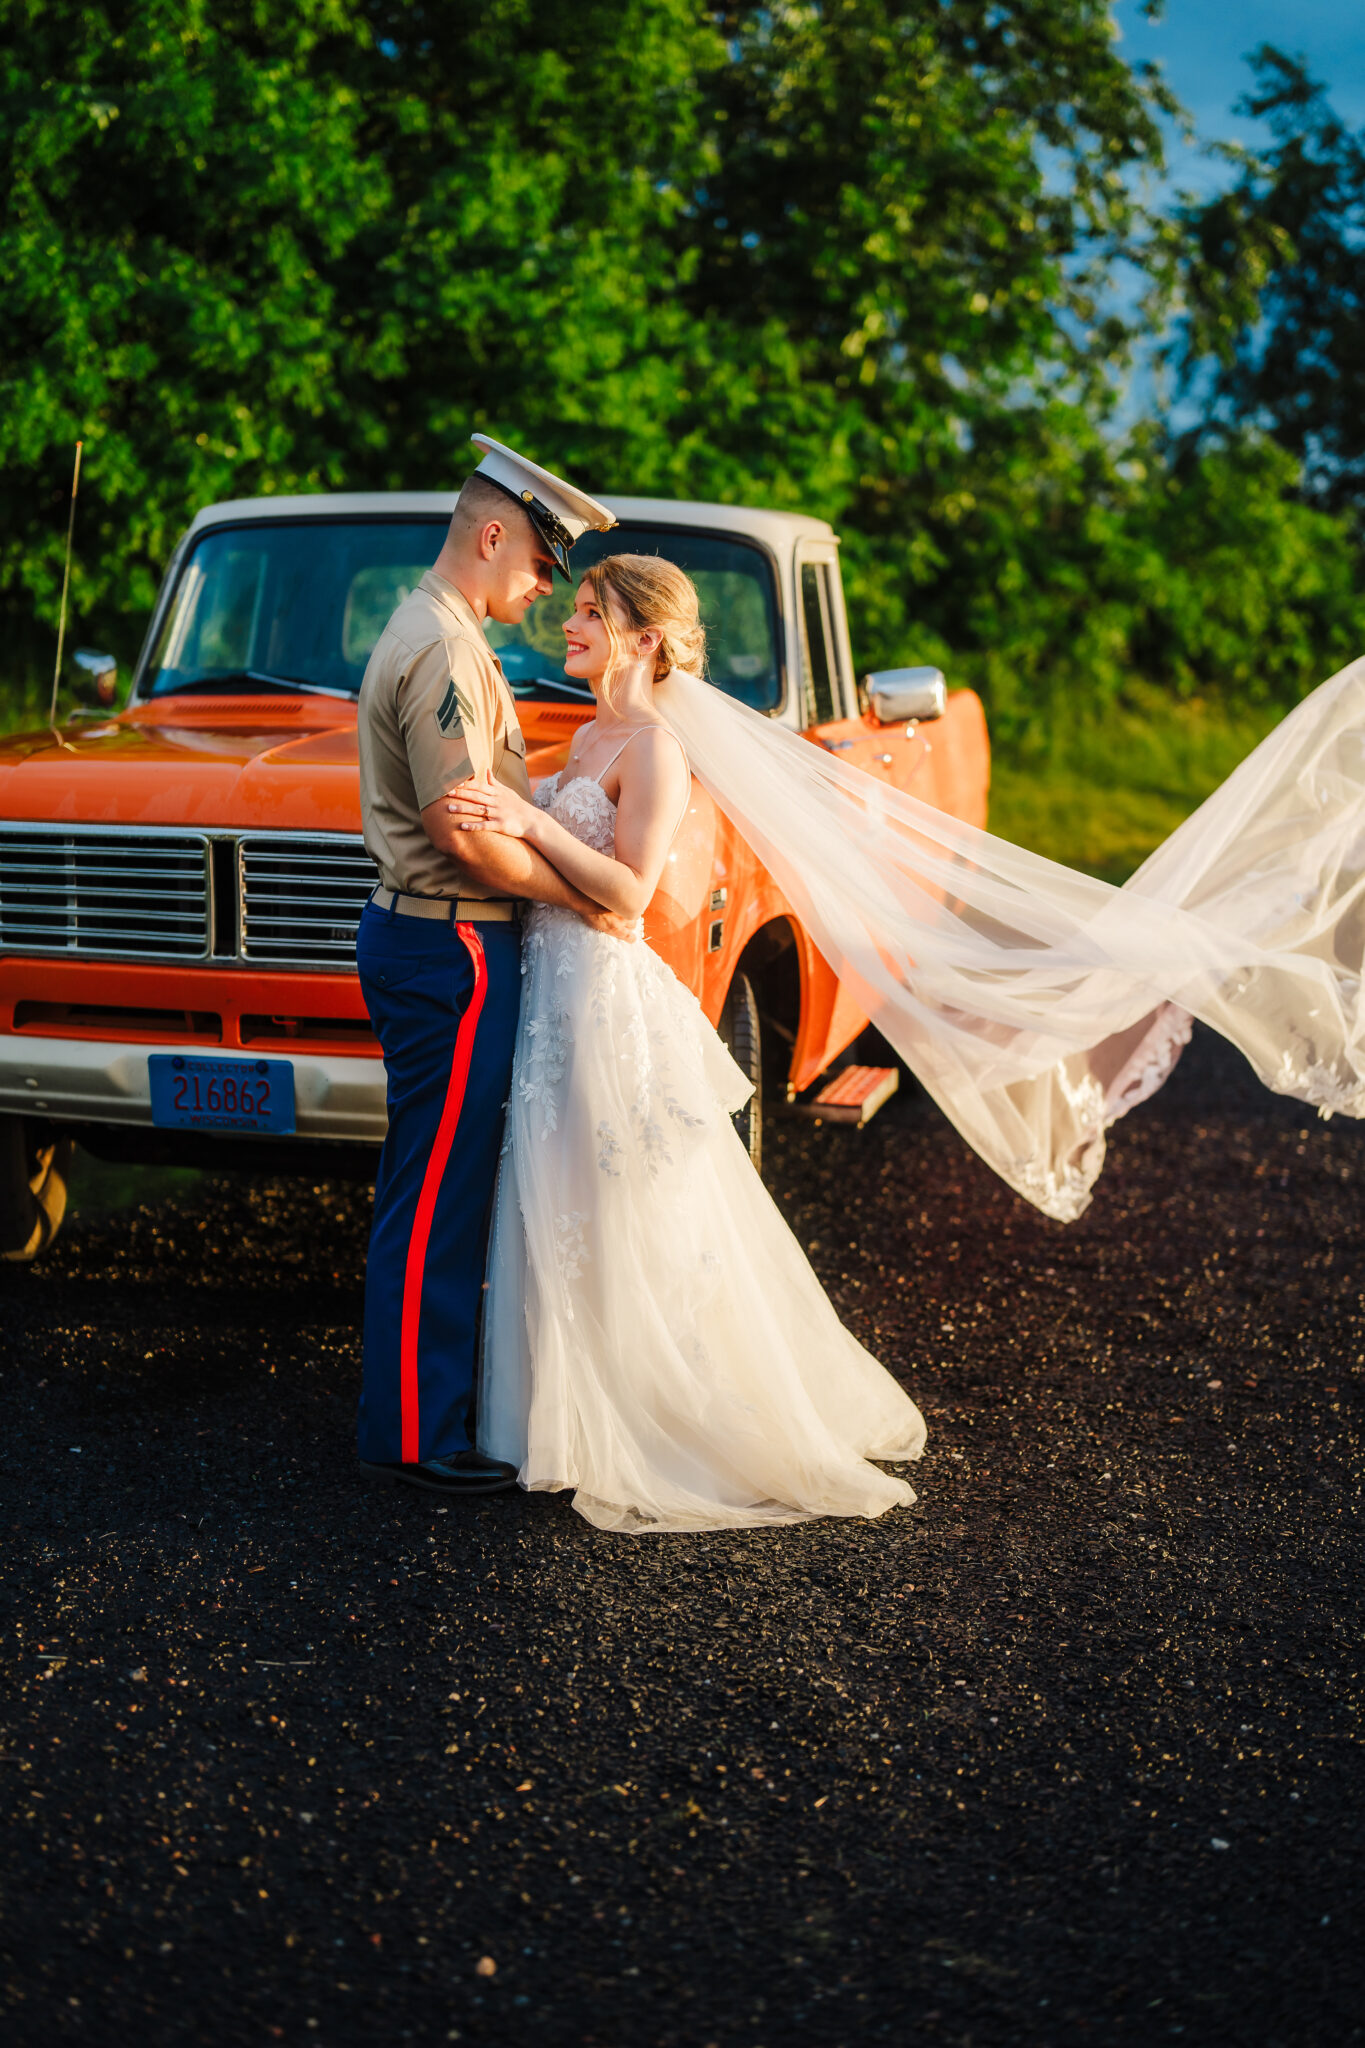 A newly married couple in a romantic embrace in front of a vintage orange truck as the bride's veil blows in the wind. 